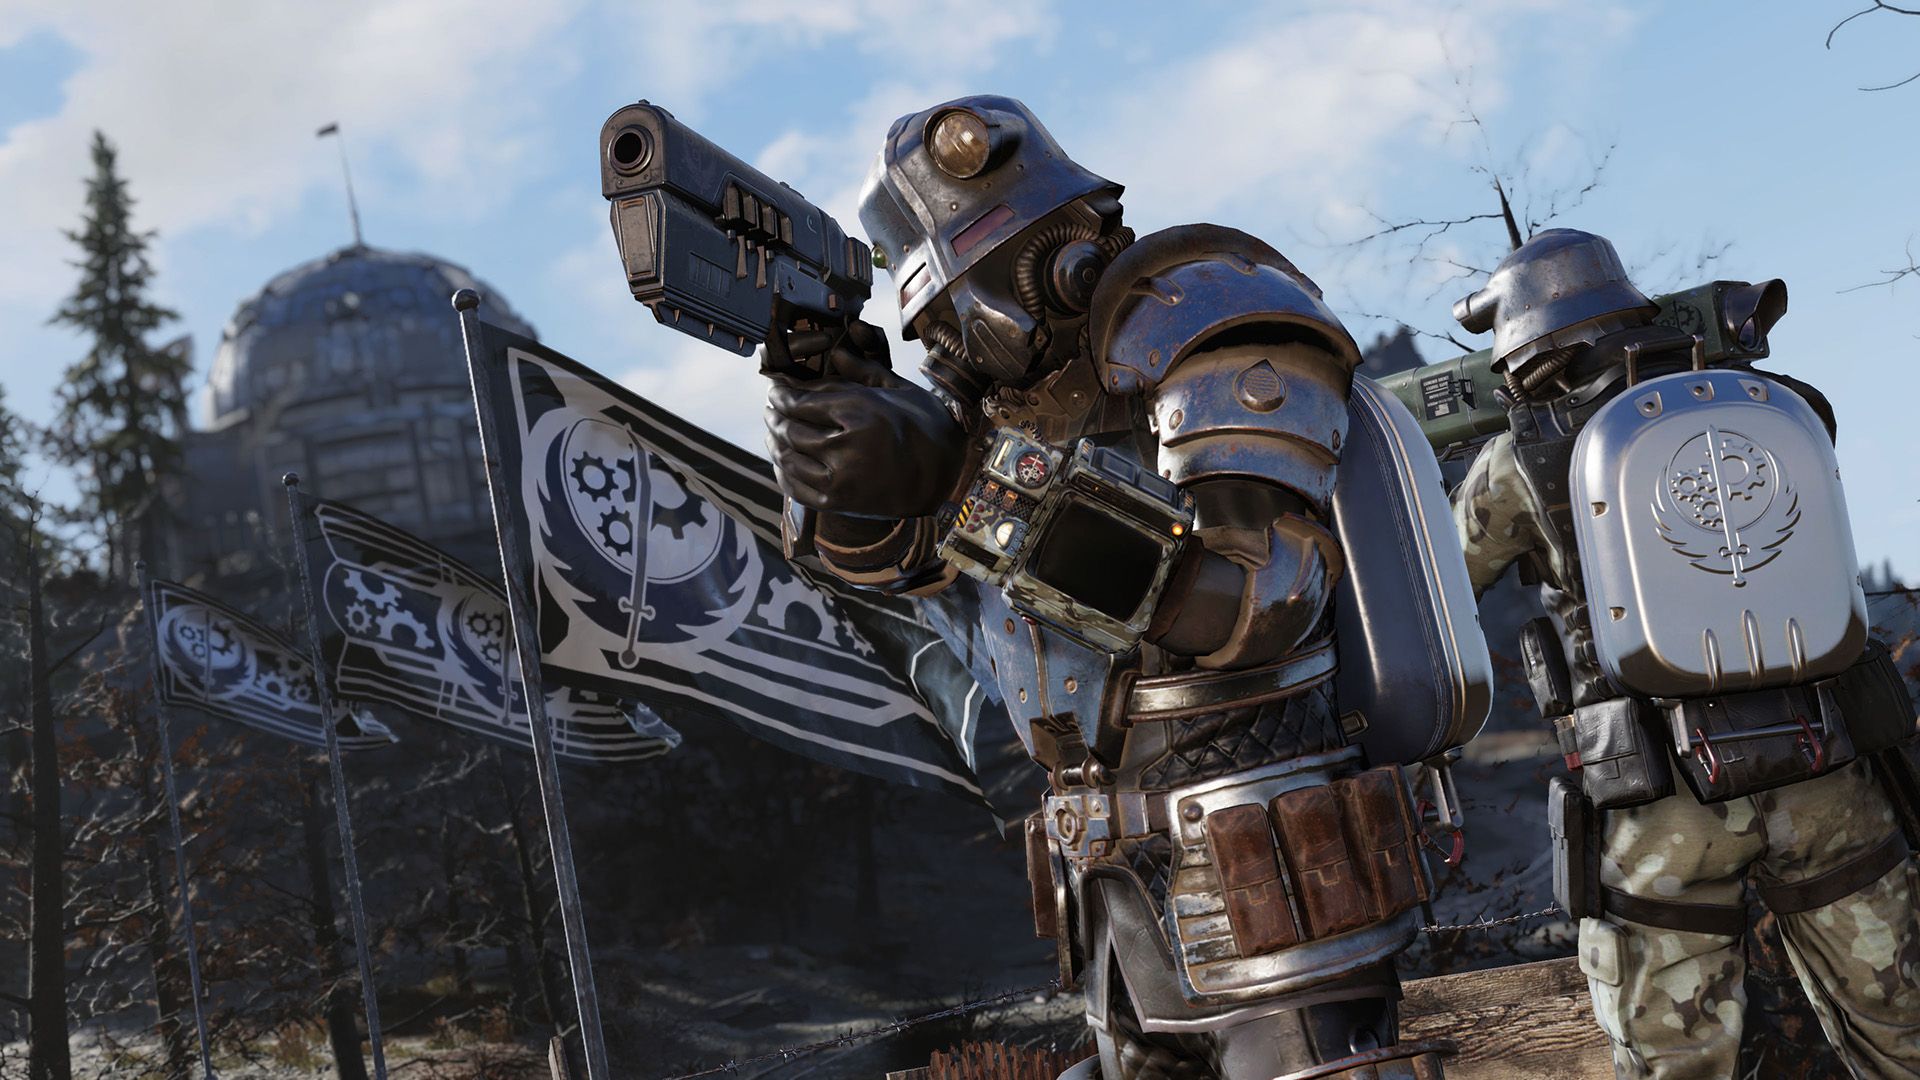 Fallout 76’s battle royale game mode Nuclear Winter closes this September